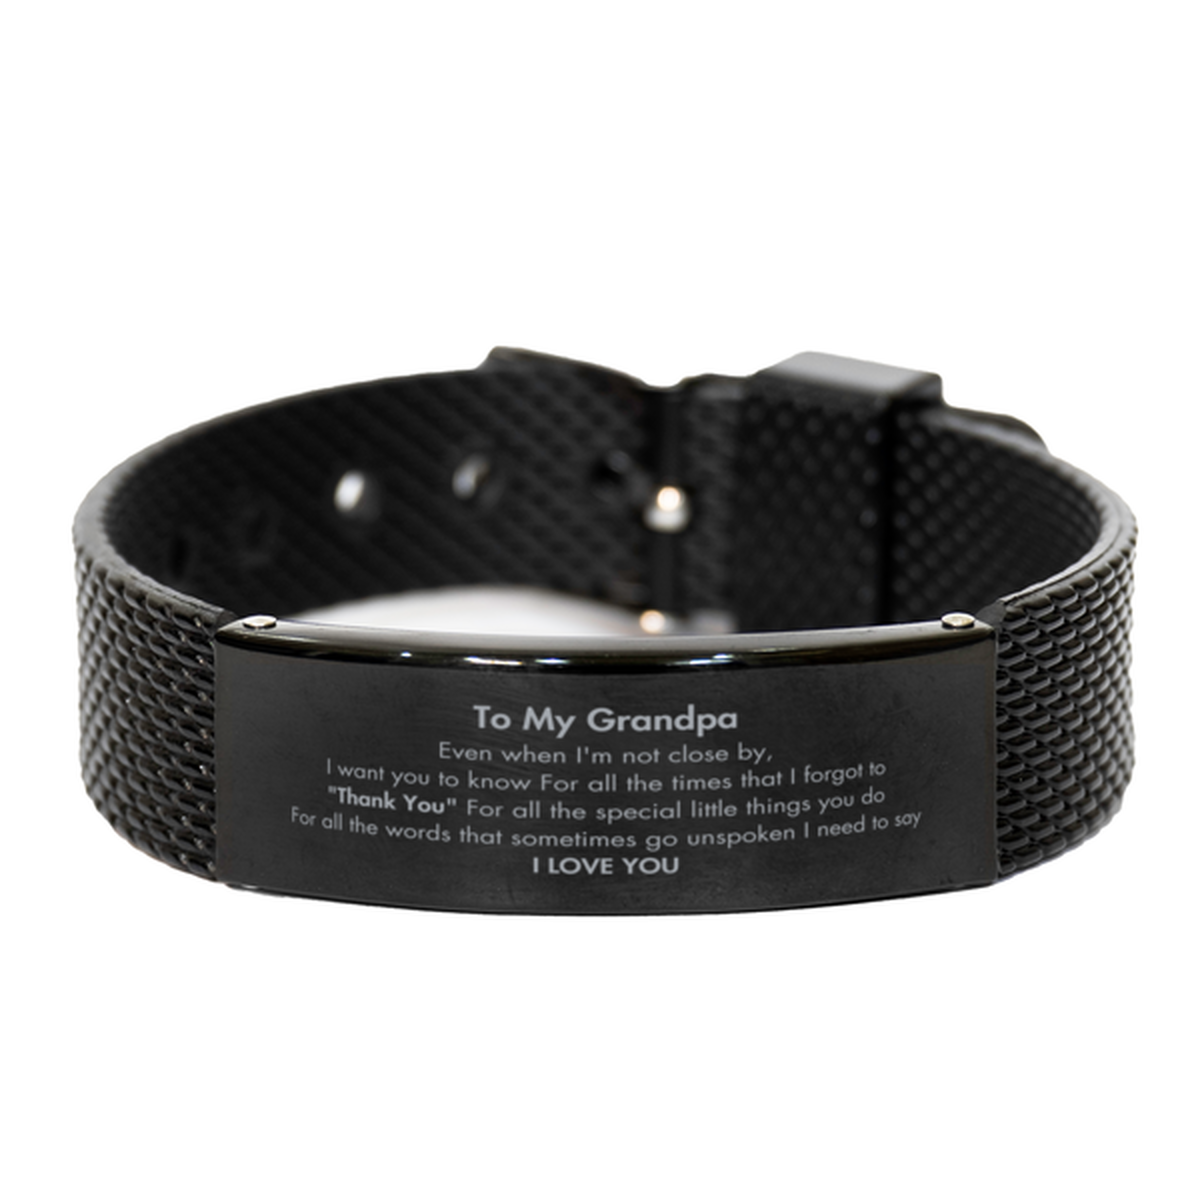 Thank You Gifts for Grandpa, Keepsake Black Shark Mesh Bracelet Gifts for Grandpa Birthday Mother's day Father's Day Grandpa For all the words That sometimes go unspoken I need to say I LOVE YOU